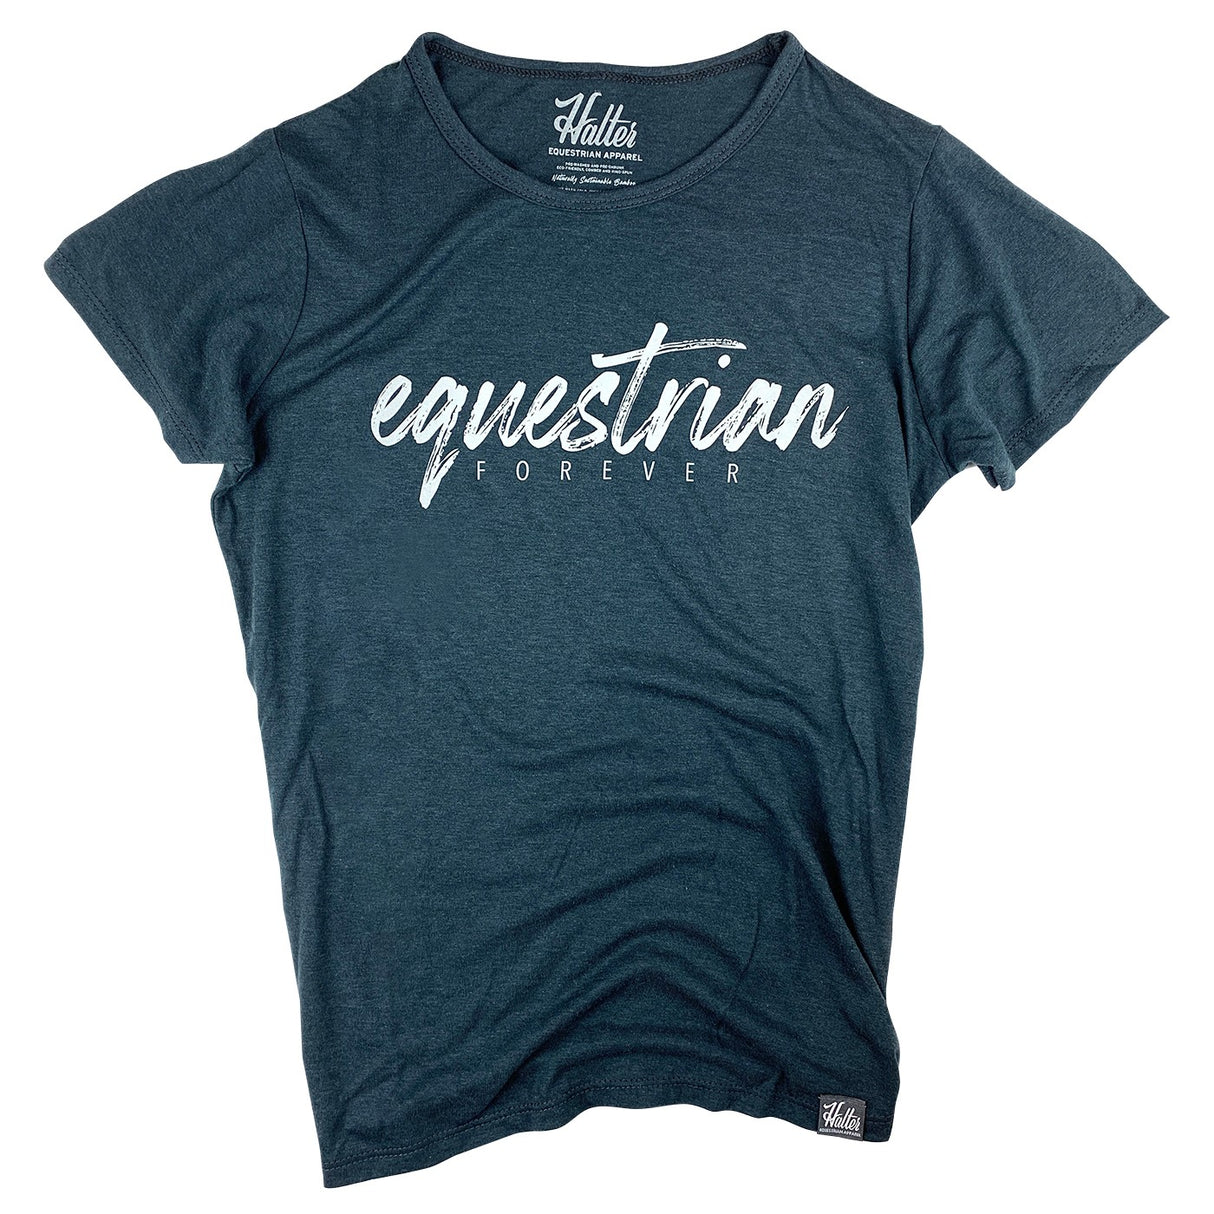 Halter Equestrian Forever Bamboo Tee